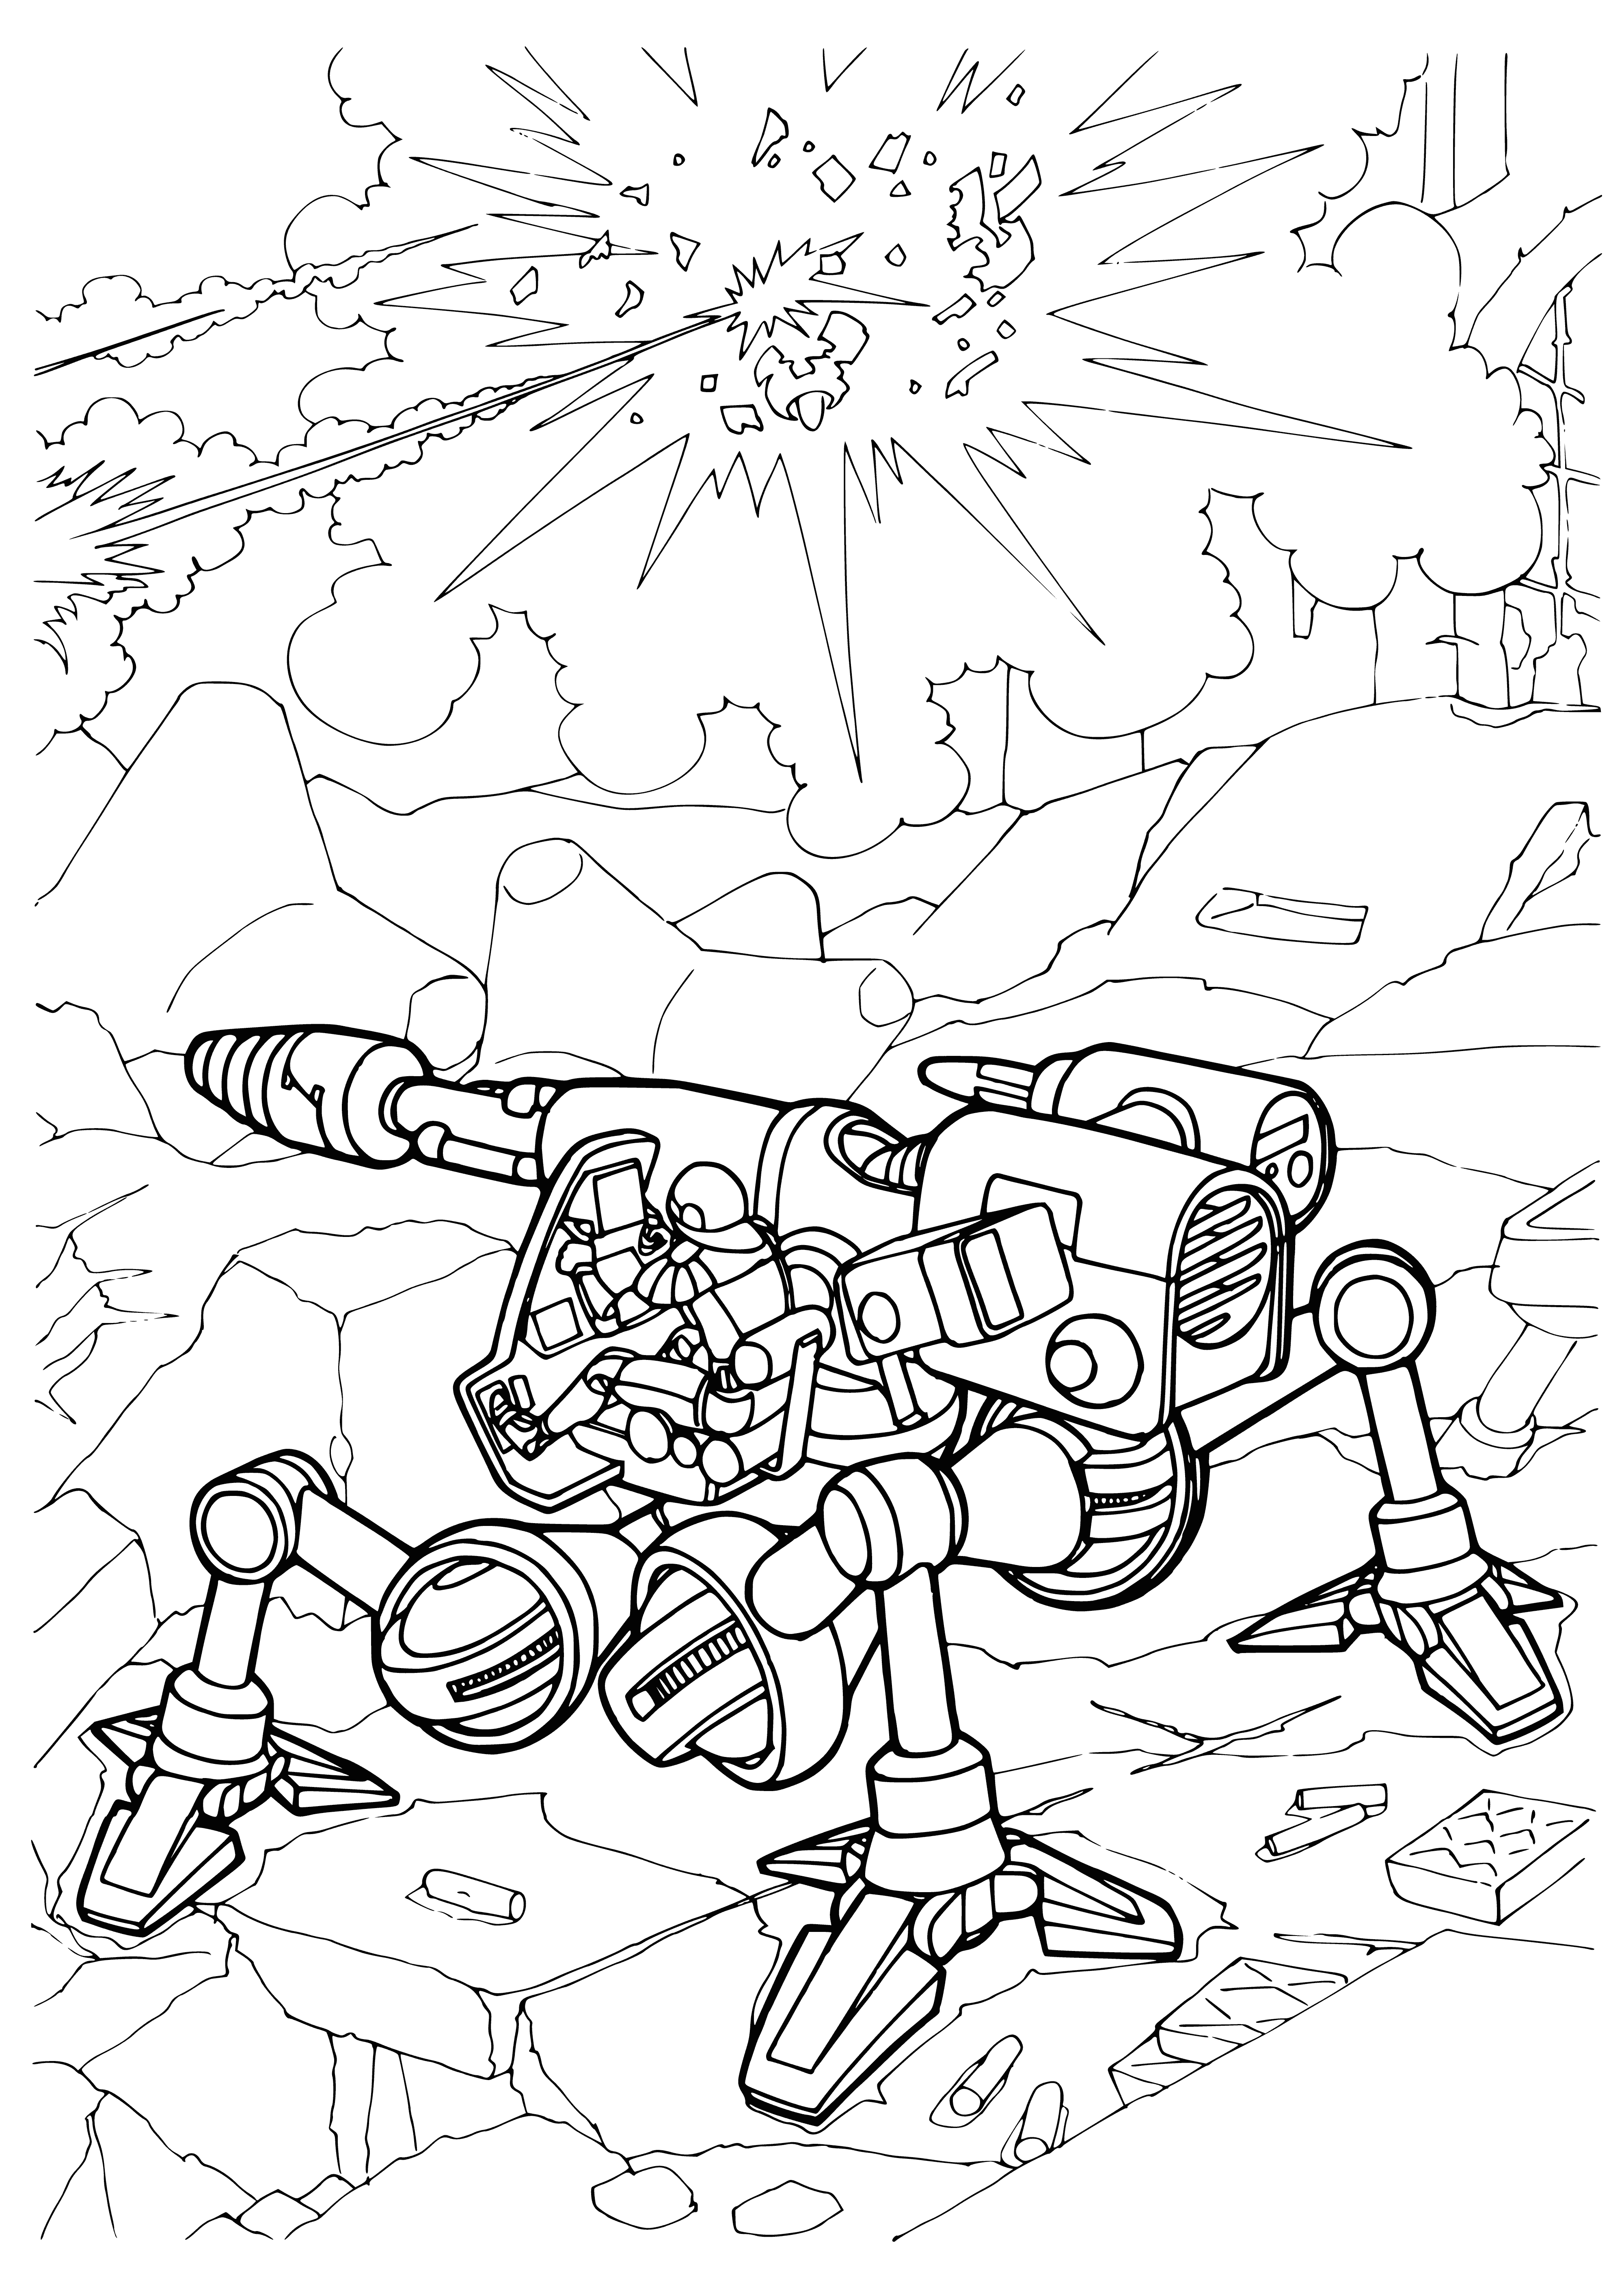 coloring page: War: fought with walking plasmomets, shooting plasma beams from their mouths. Immune to terrain and destruction.